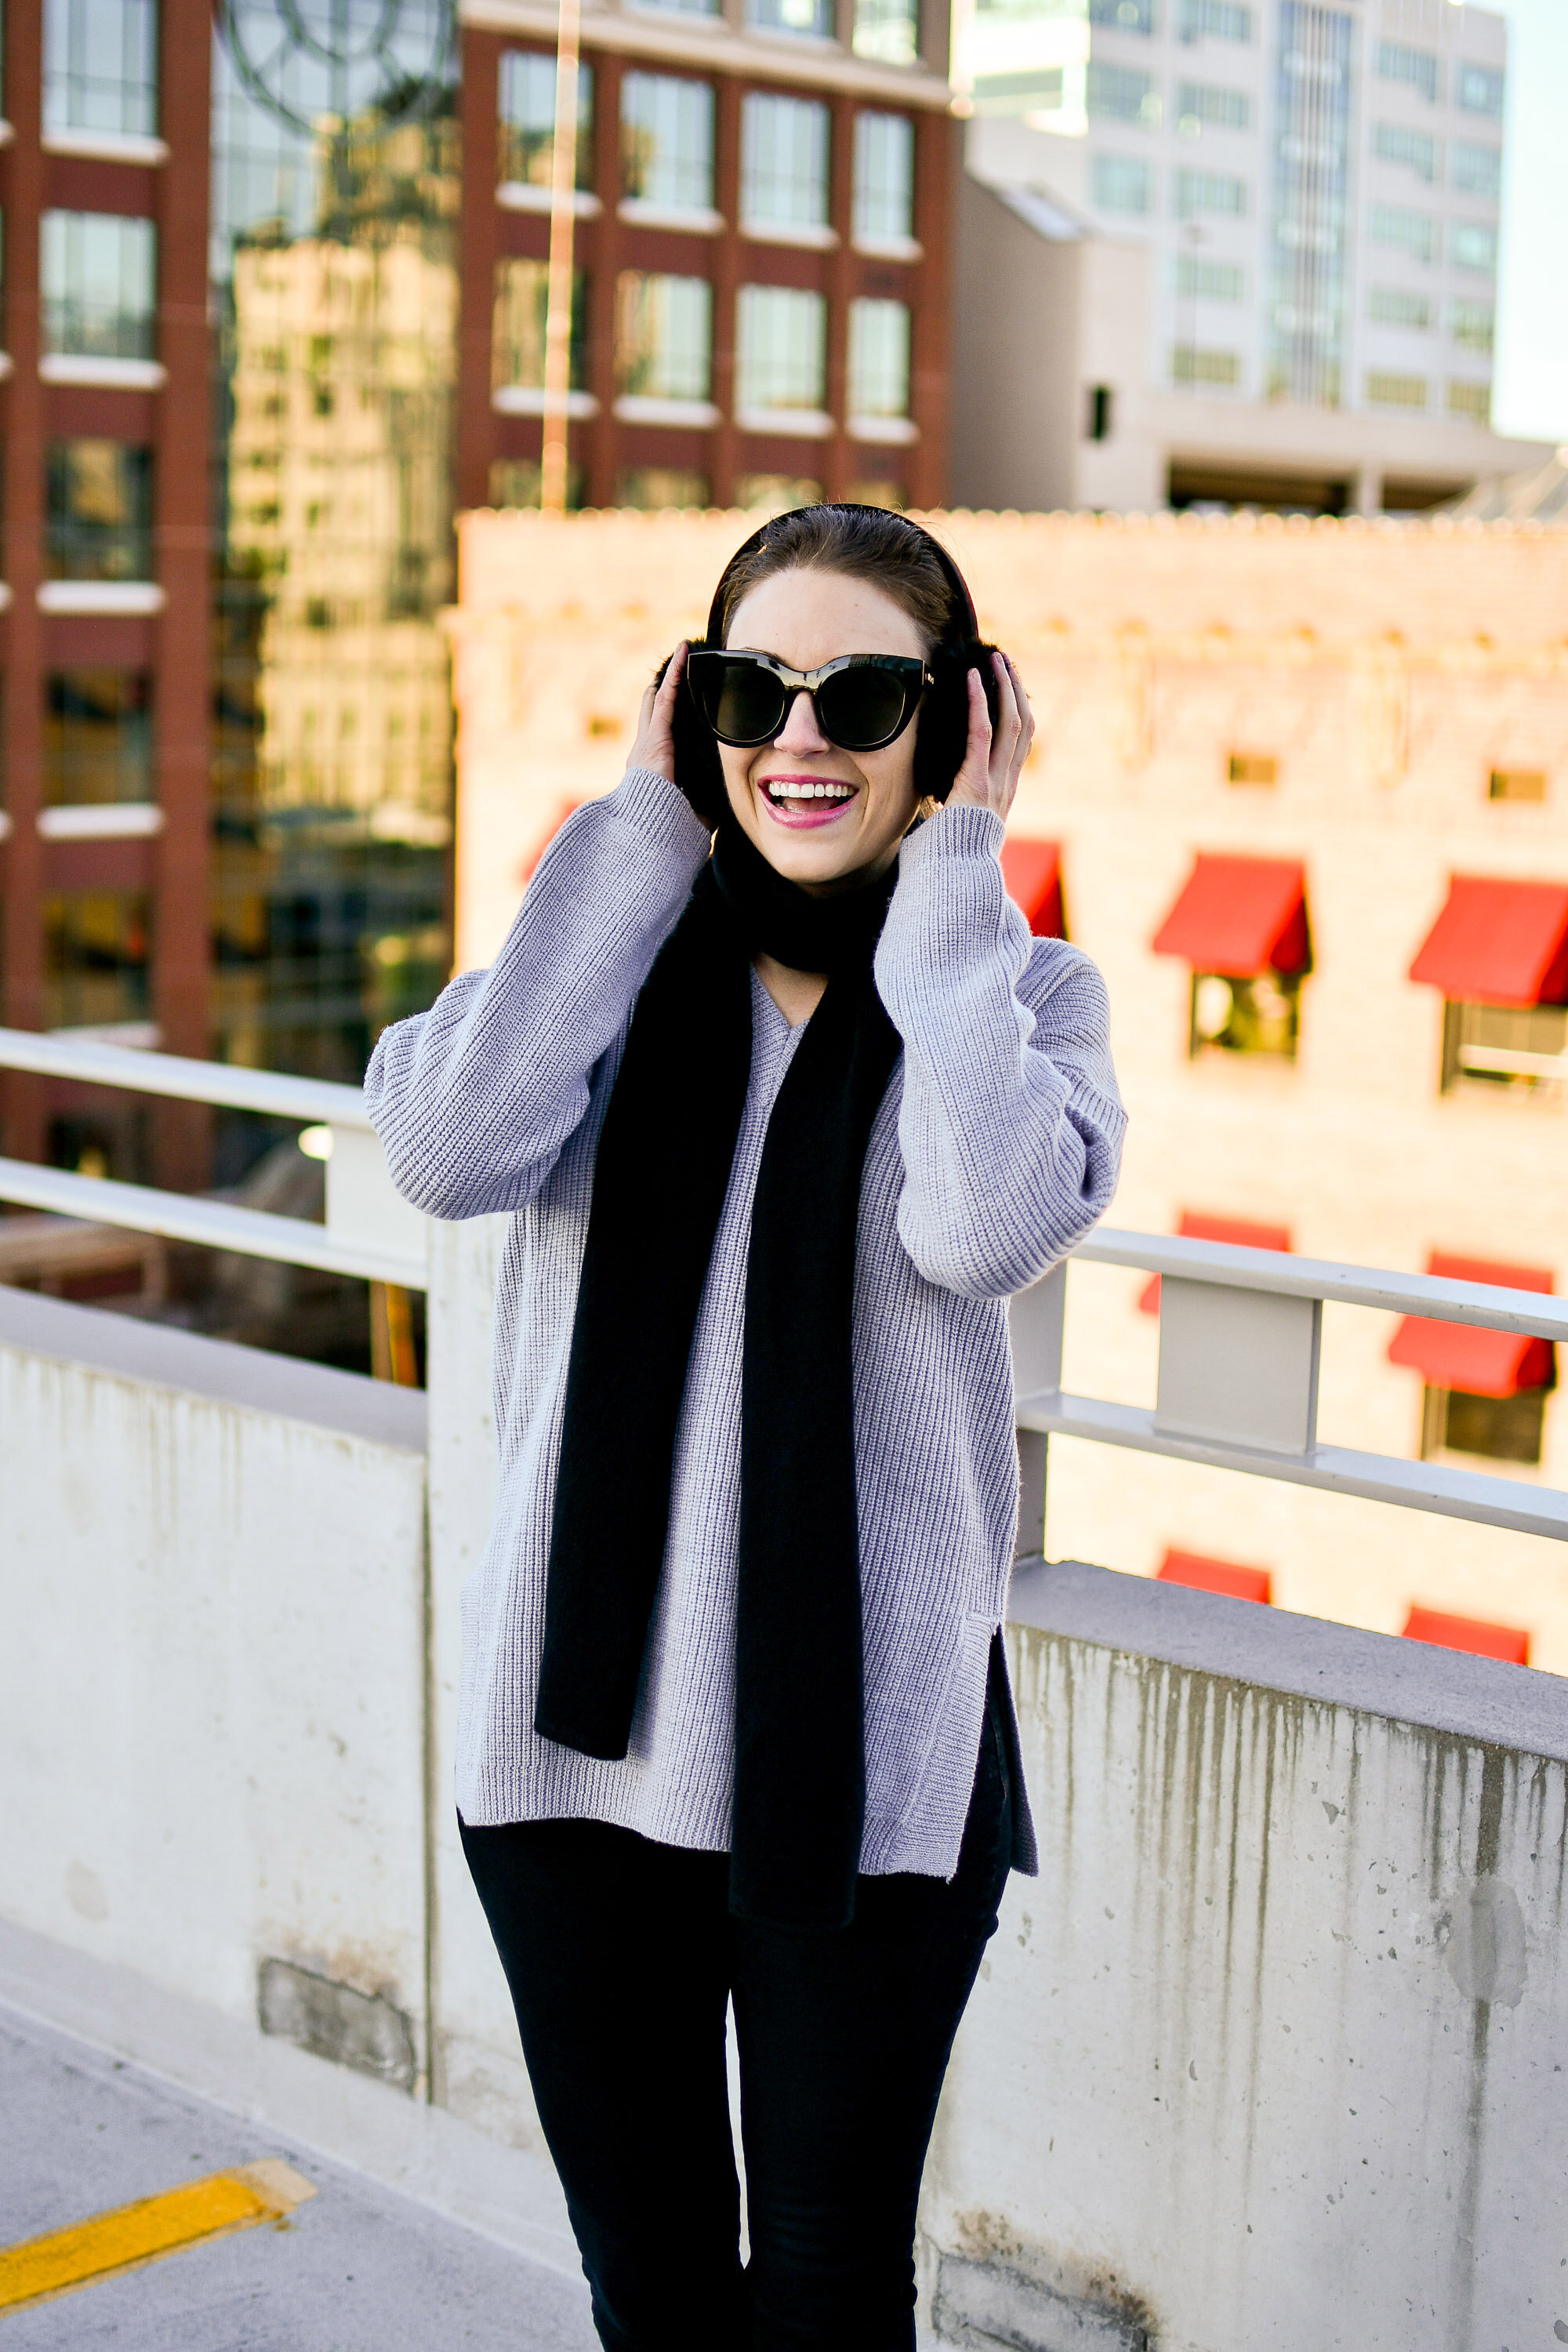 Black and grey cold weather outfit